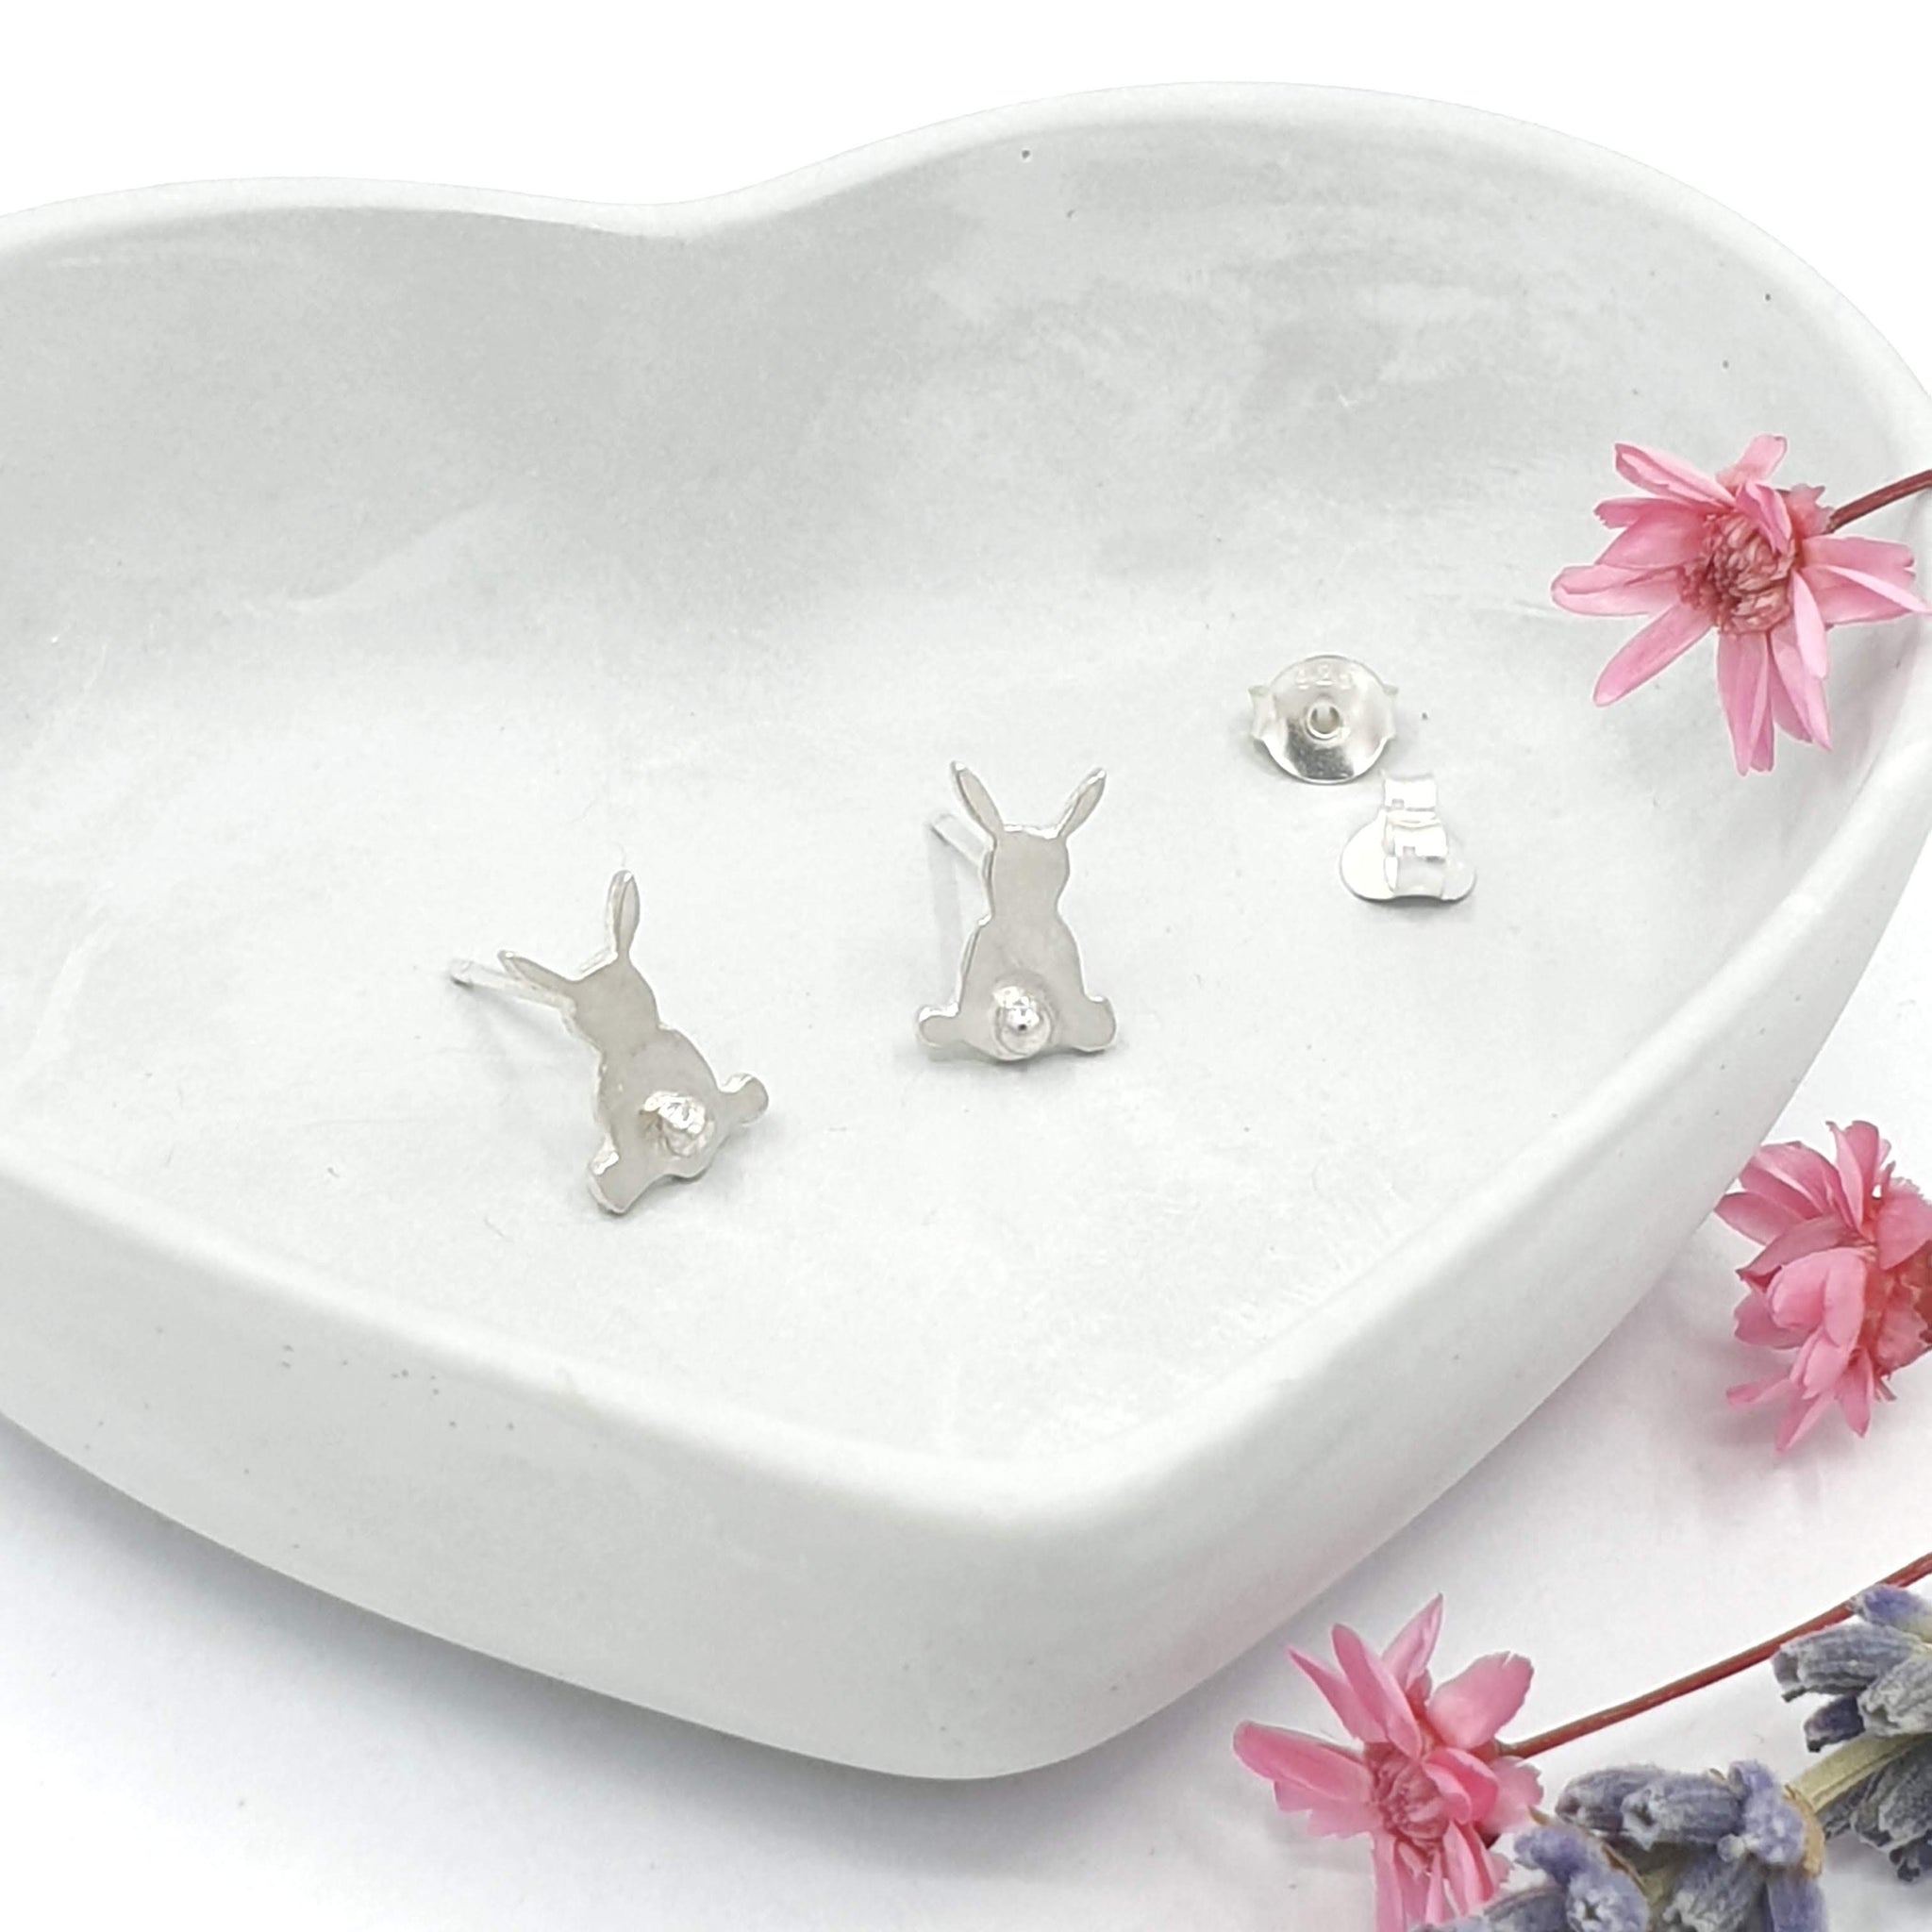 Silver earrings of rabbits from behind with 3D tail detail